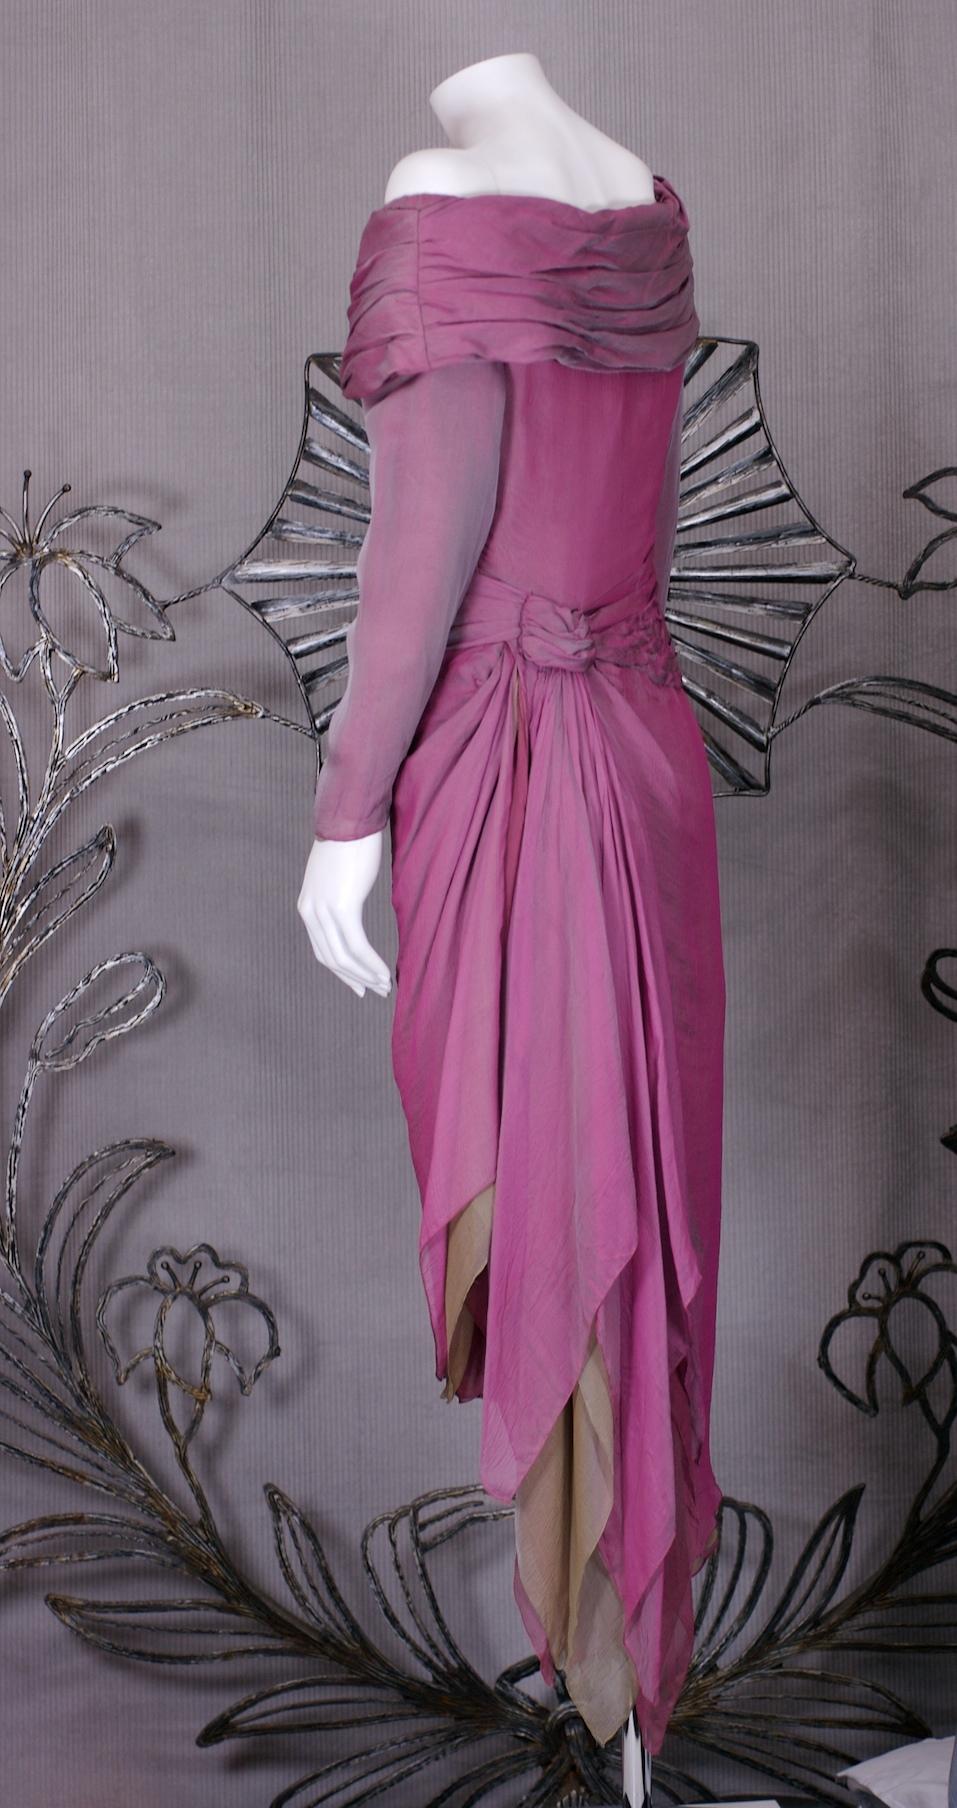 Paul Louis Orrier Changeant Draped Chiffon Cocktail Dress In Excellent Condition For Sale In New York, NY